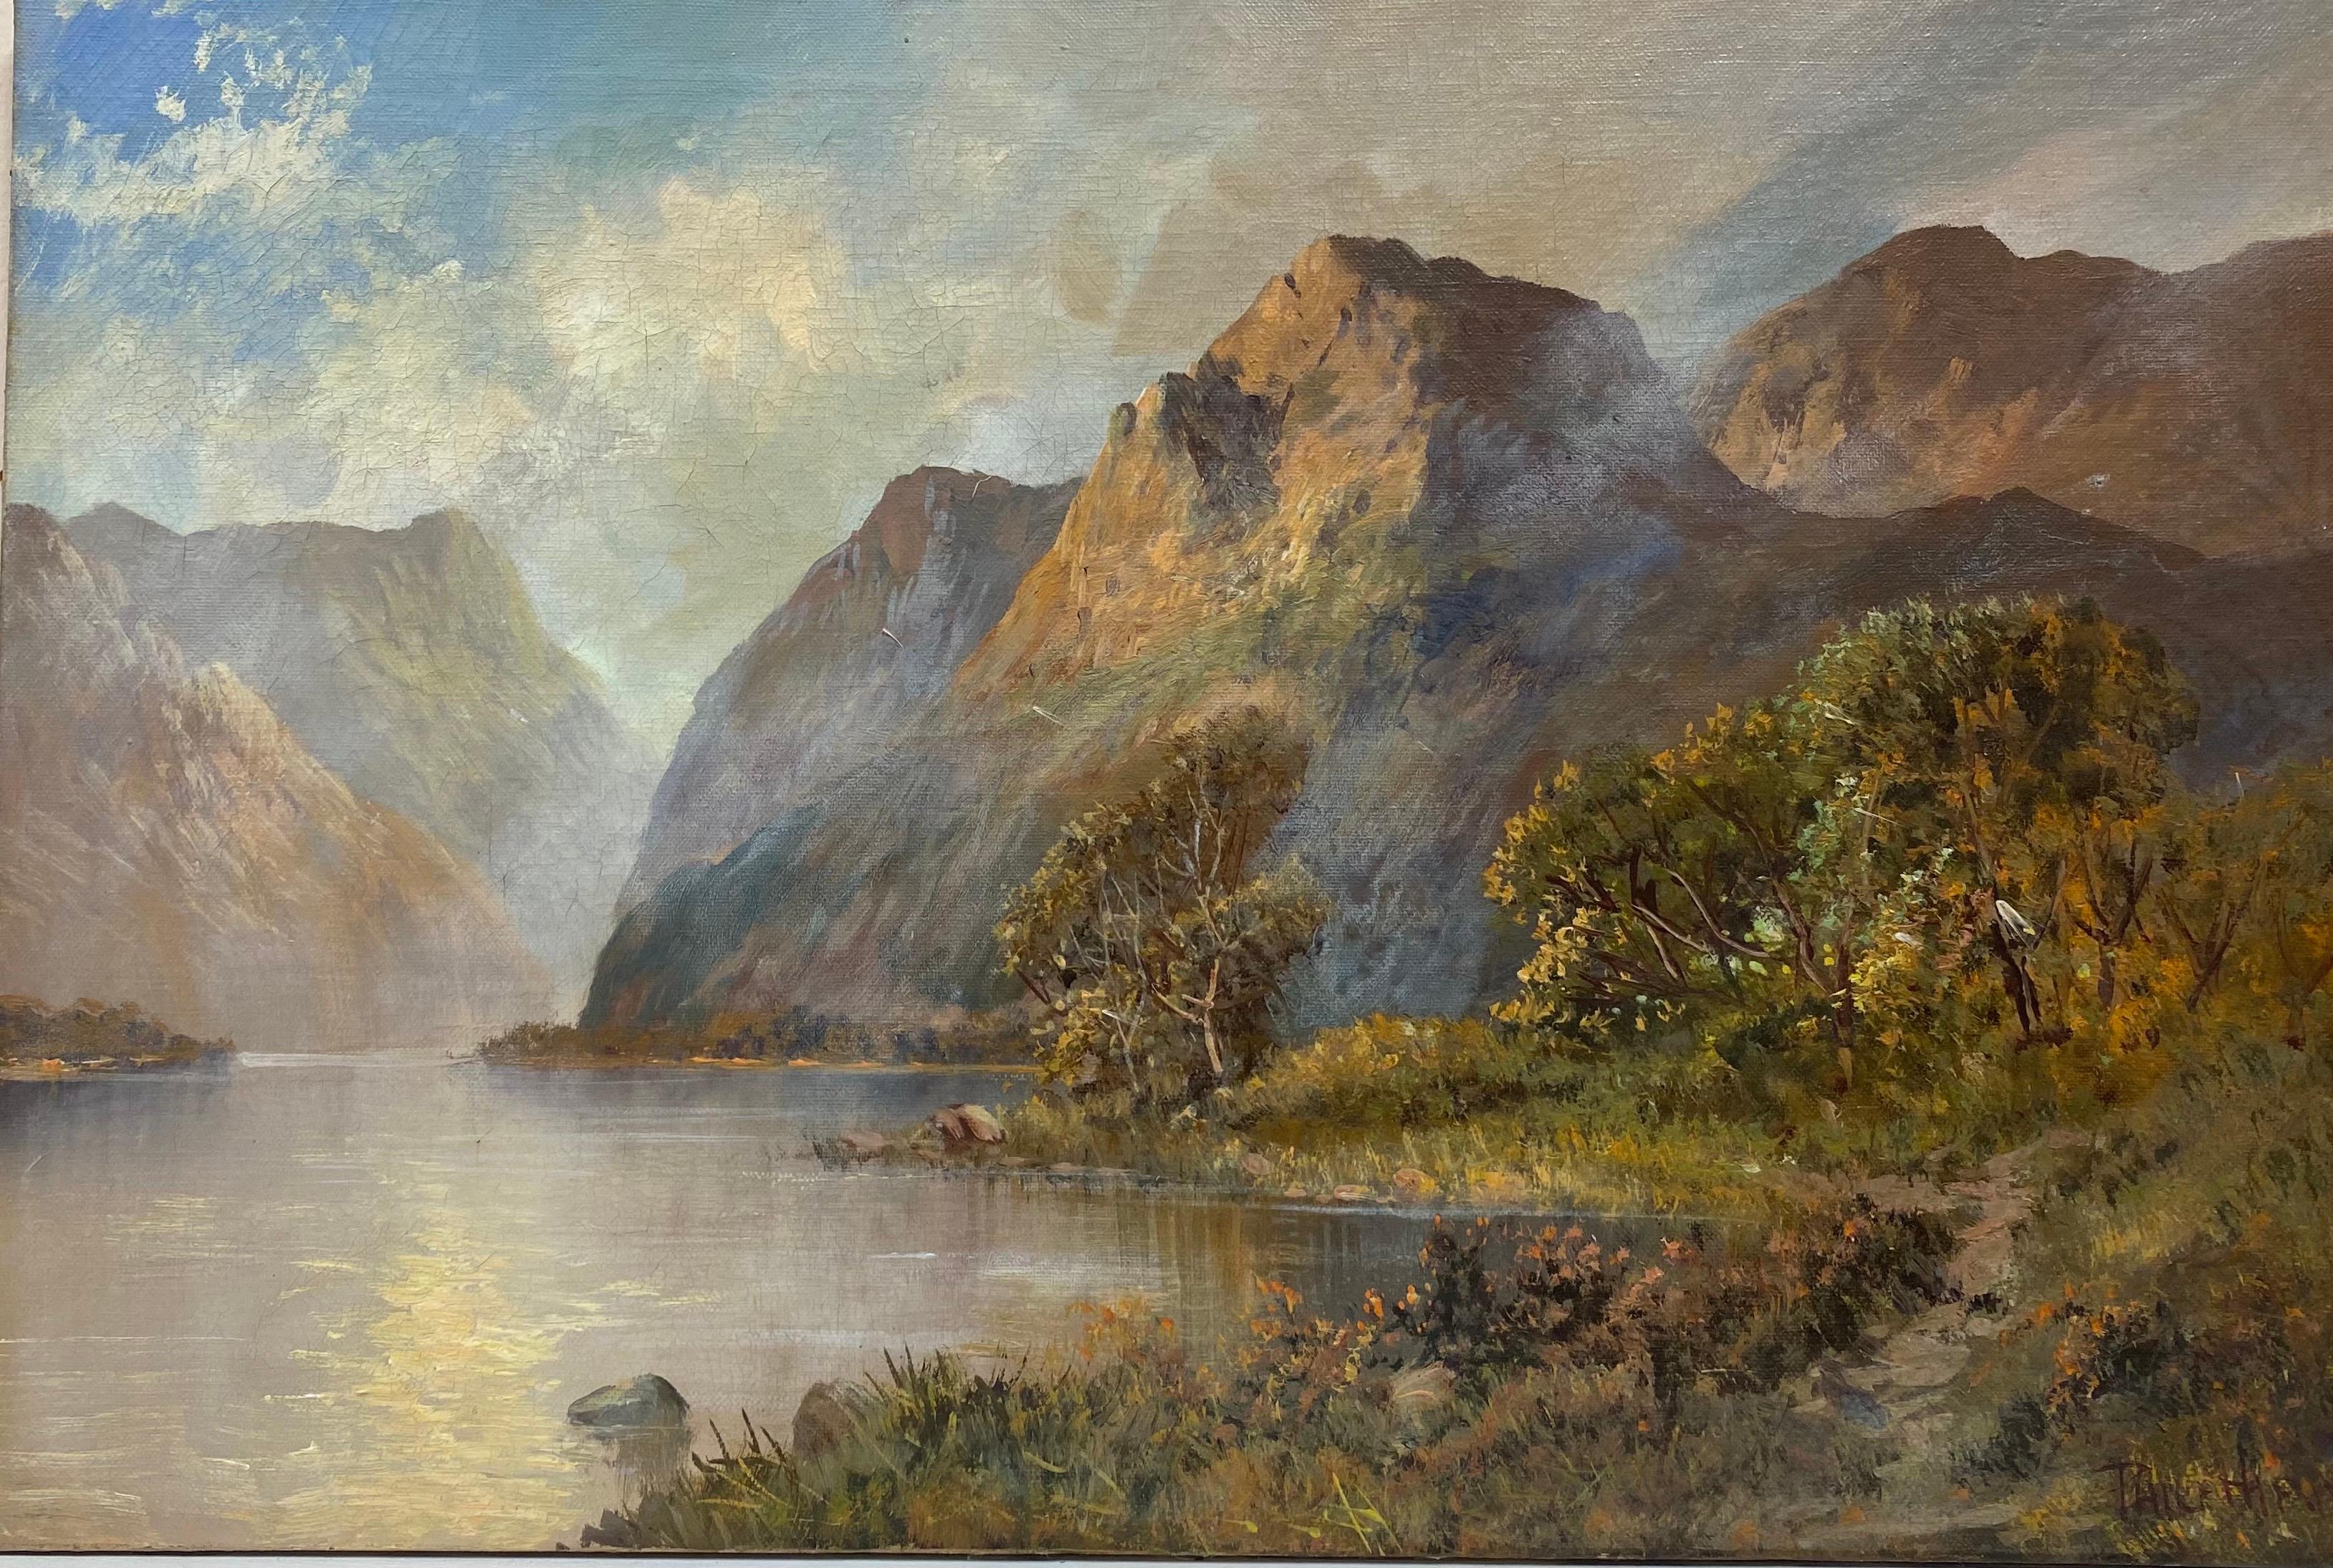 Francis E. Jamieson Figurative Painting - Antique Scottish Highlands Oil Painting Summer Loch Scene with Mountains